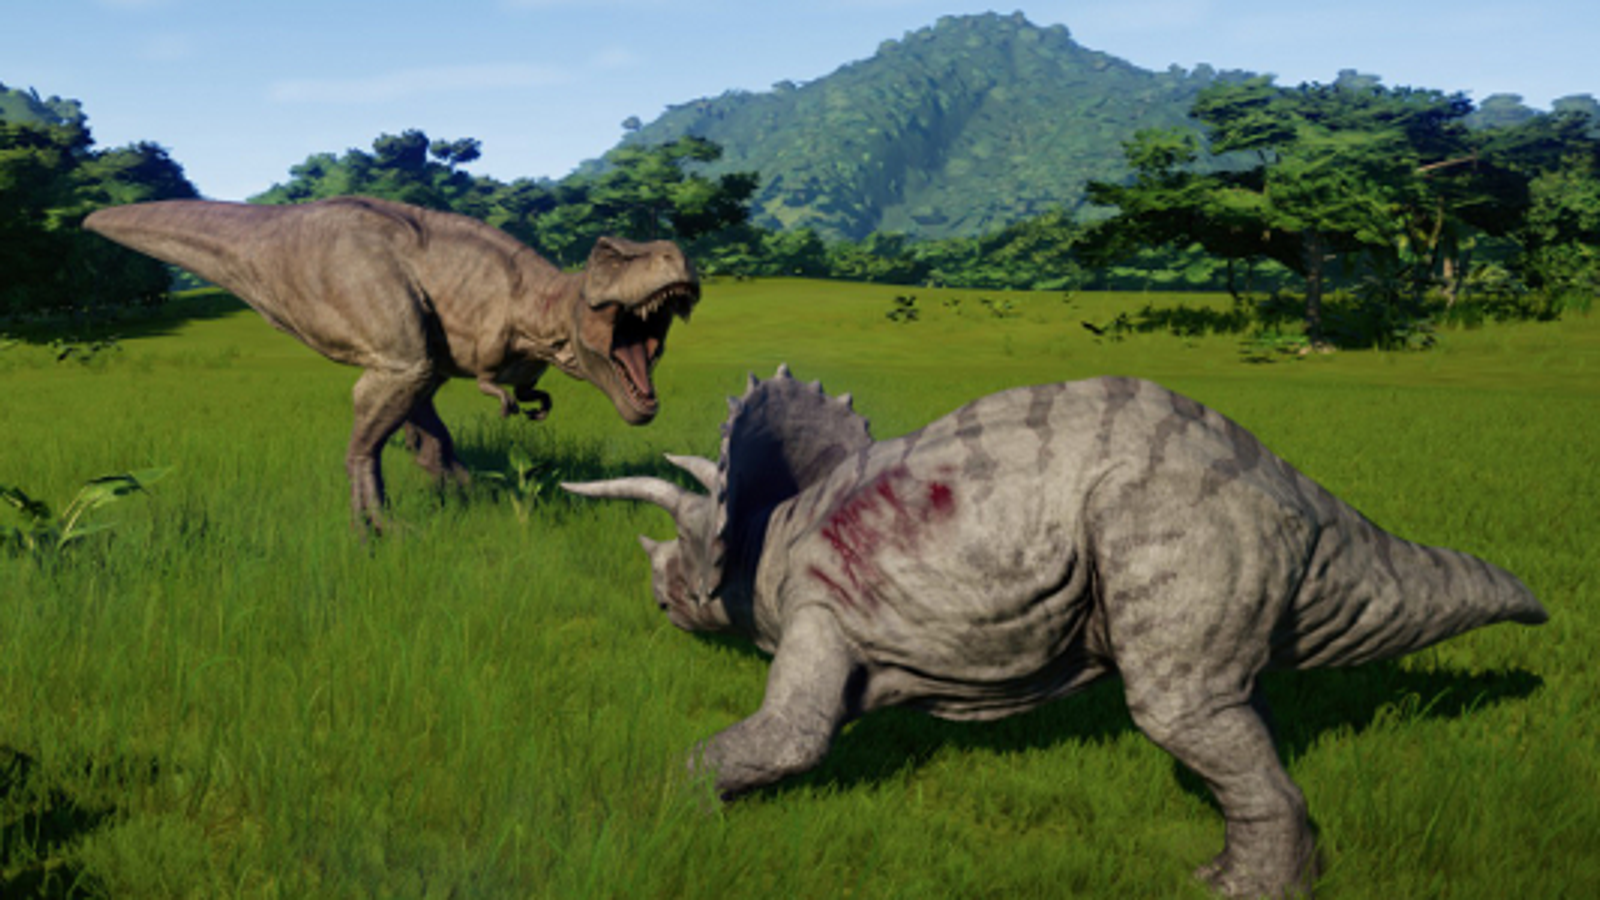 XboxOne, PS4, PC to get open world dinosaur game [Article] : r/Dinosaurs